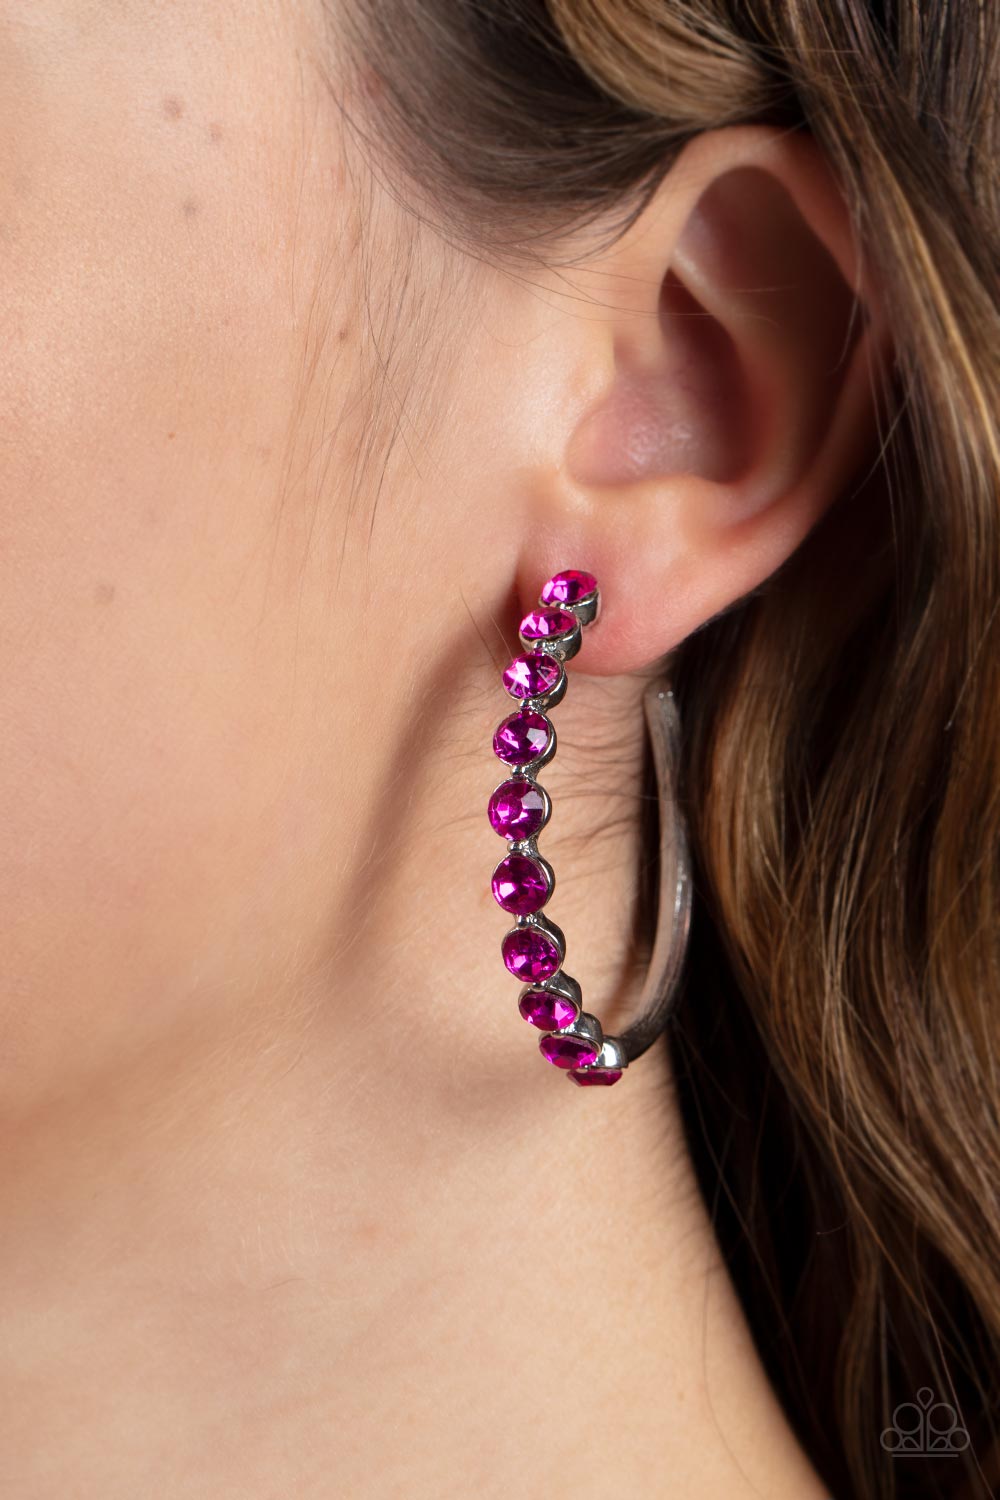 Photo Finish Pink Rhinestone Hoop Earrings - Paparazzi Accessories- on model - CarasShop.com - $5 Jewelry by Cara Jewels